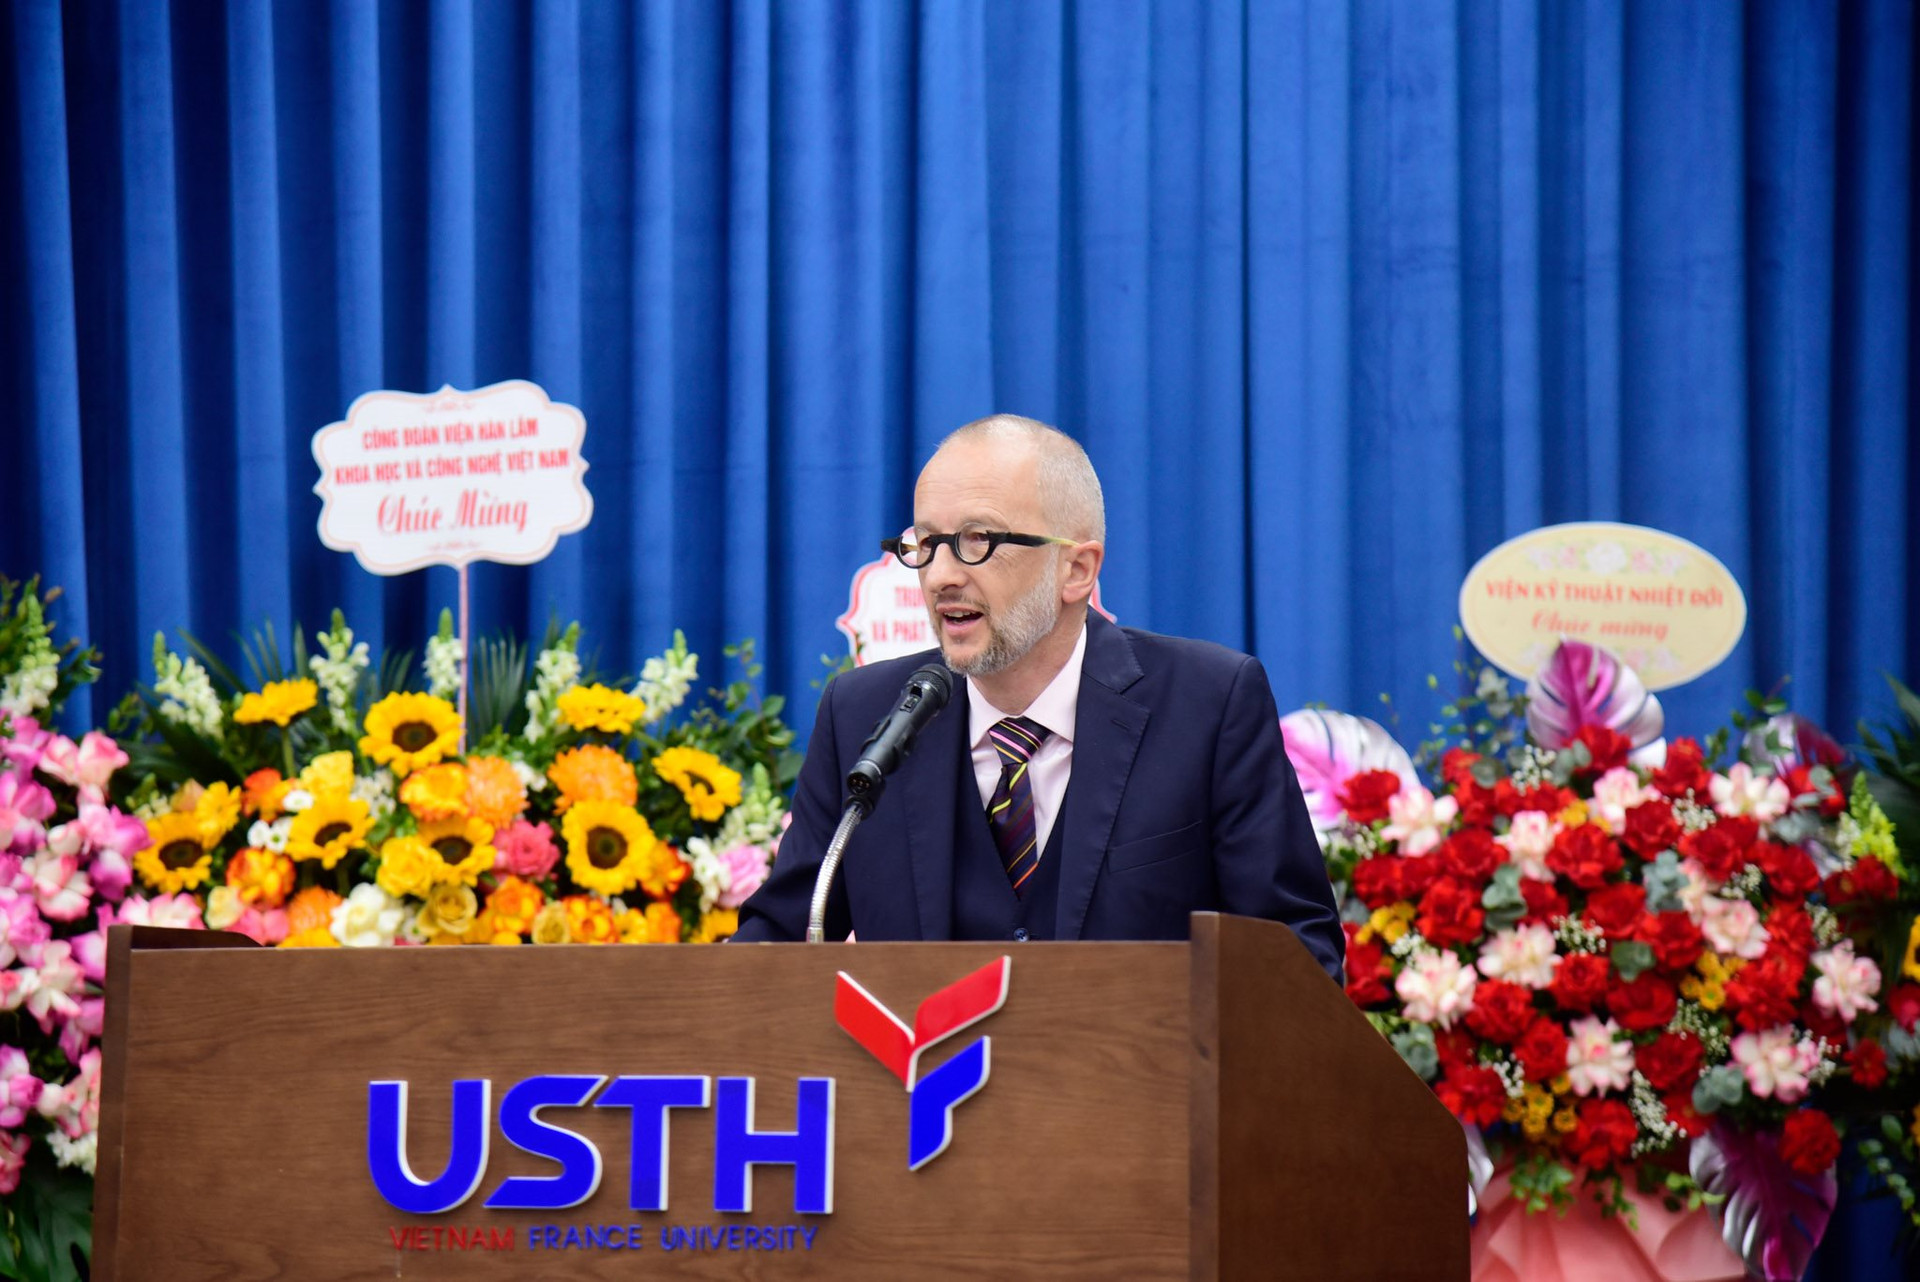 gs.-jean-marc-lavest-hieu-truong-chinh-usth.jpg